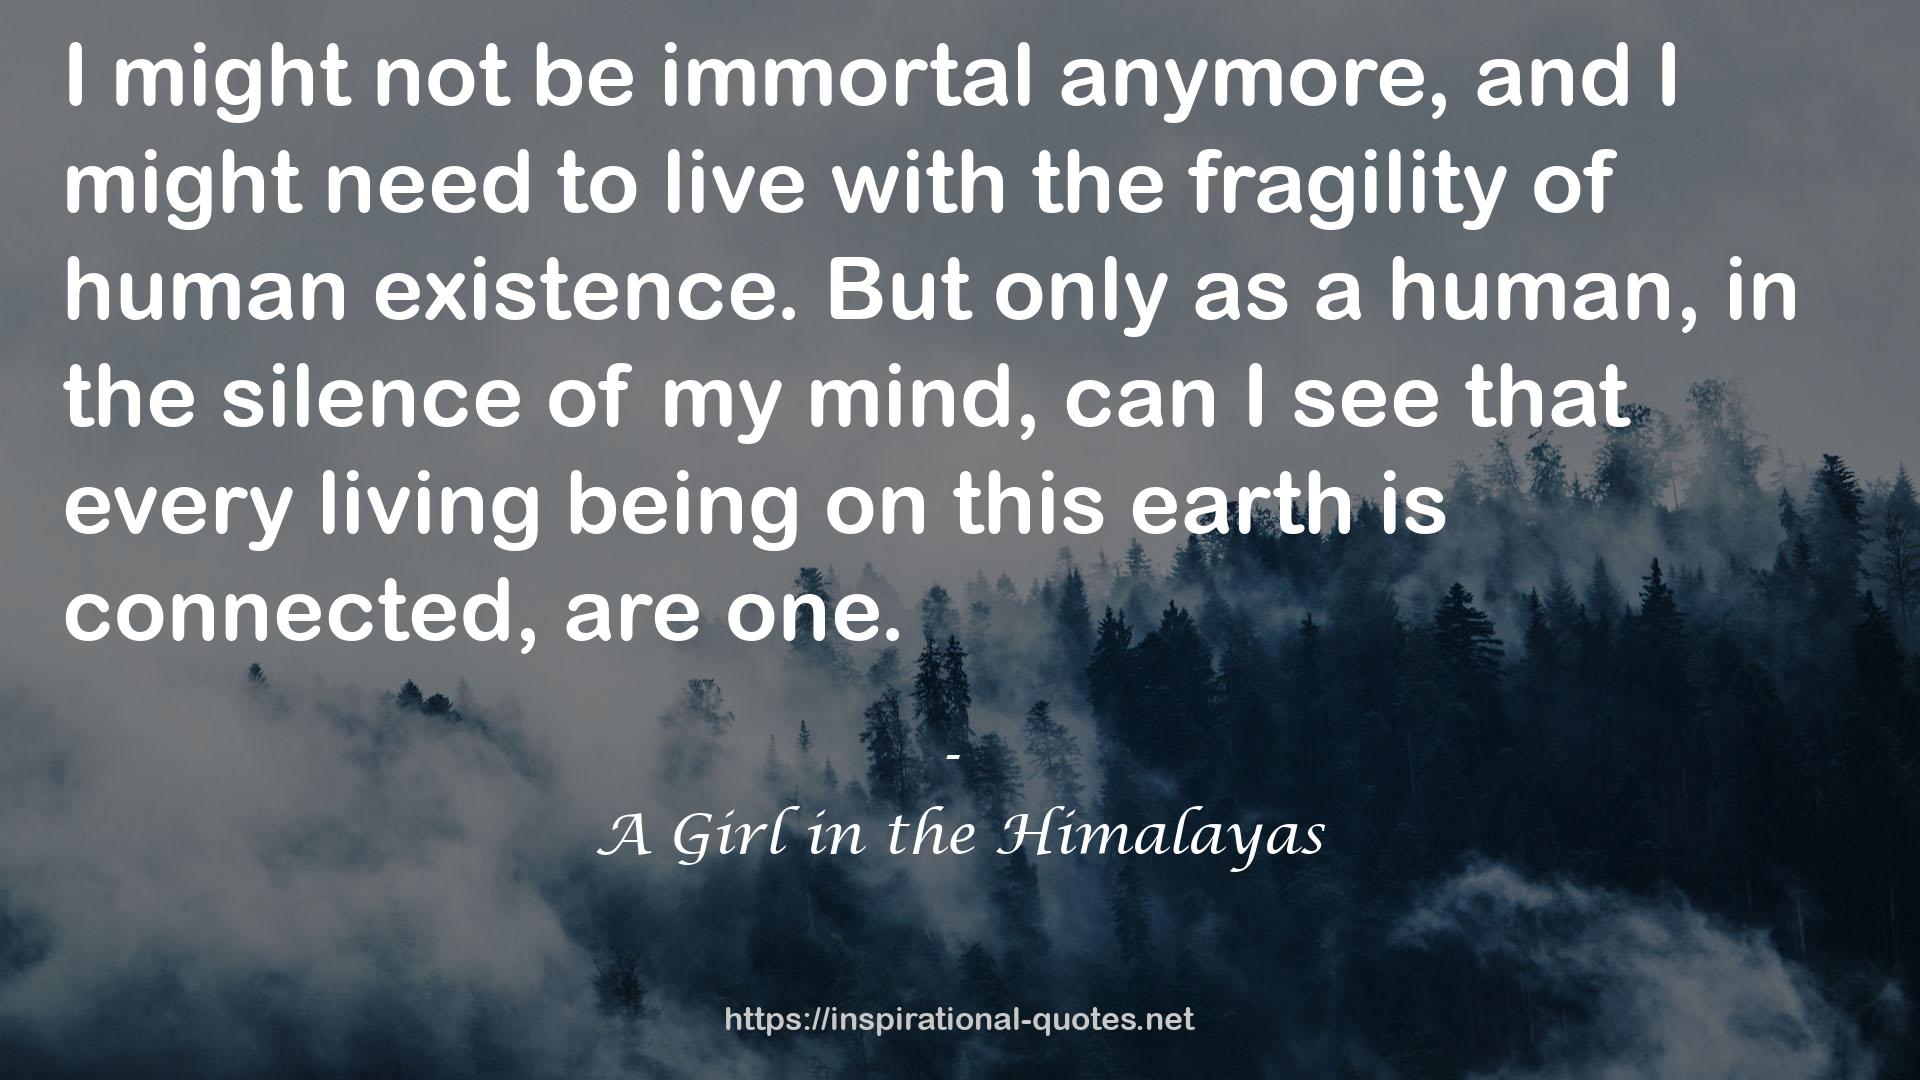 A Girl in the Himalayas QUOTES